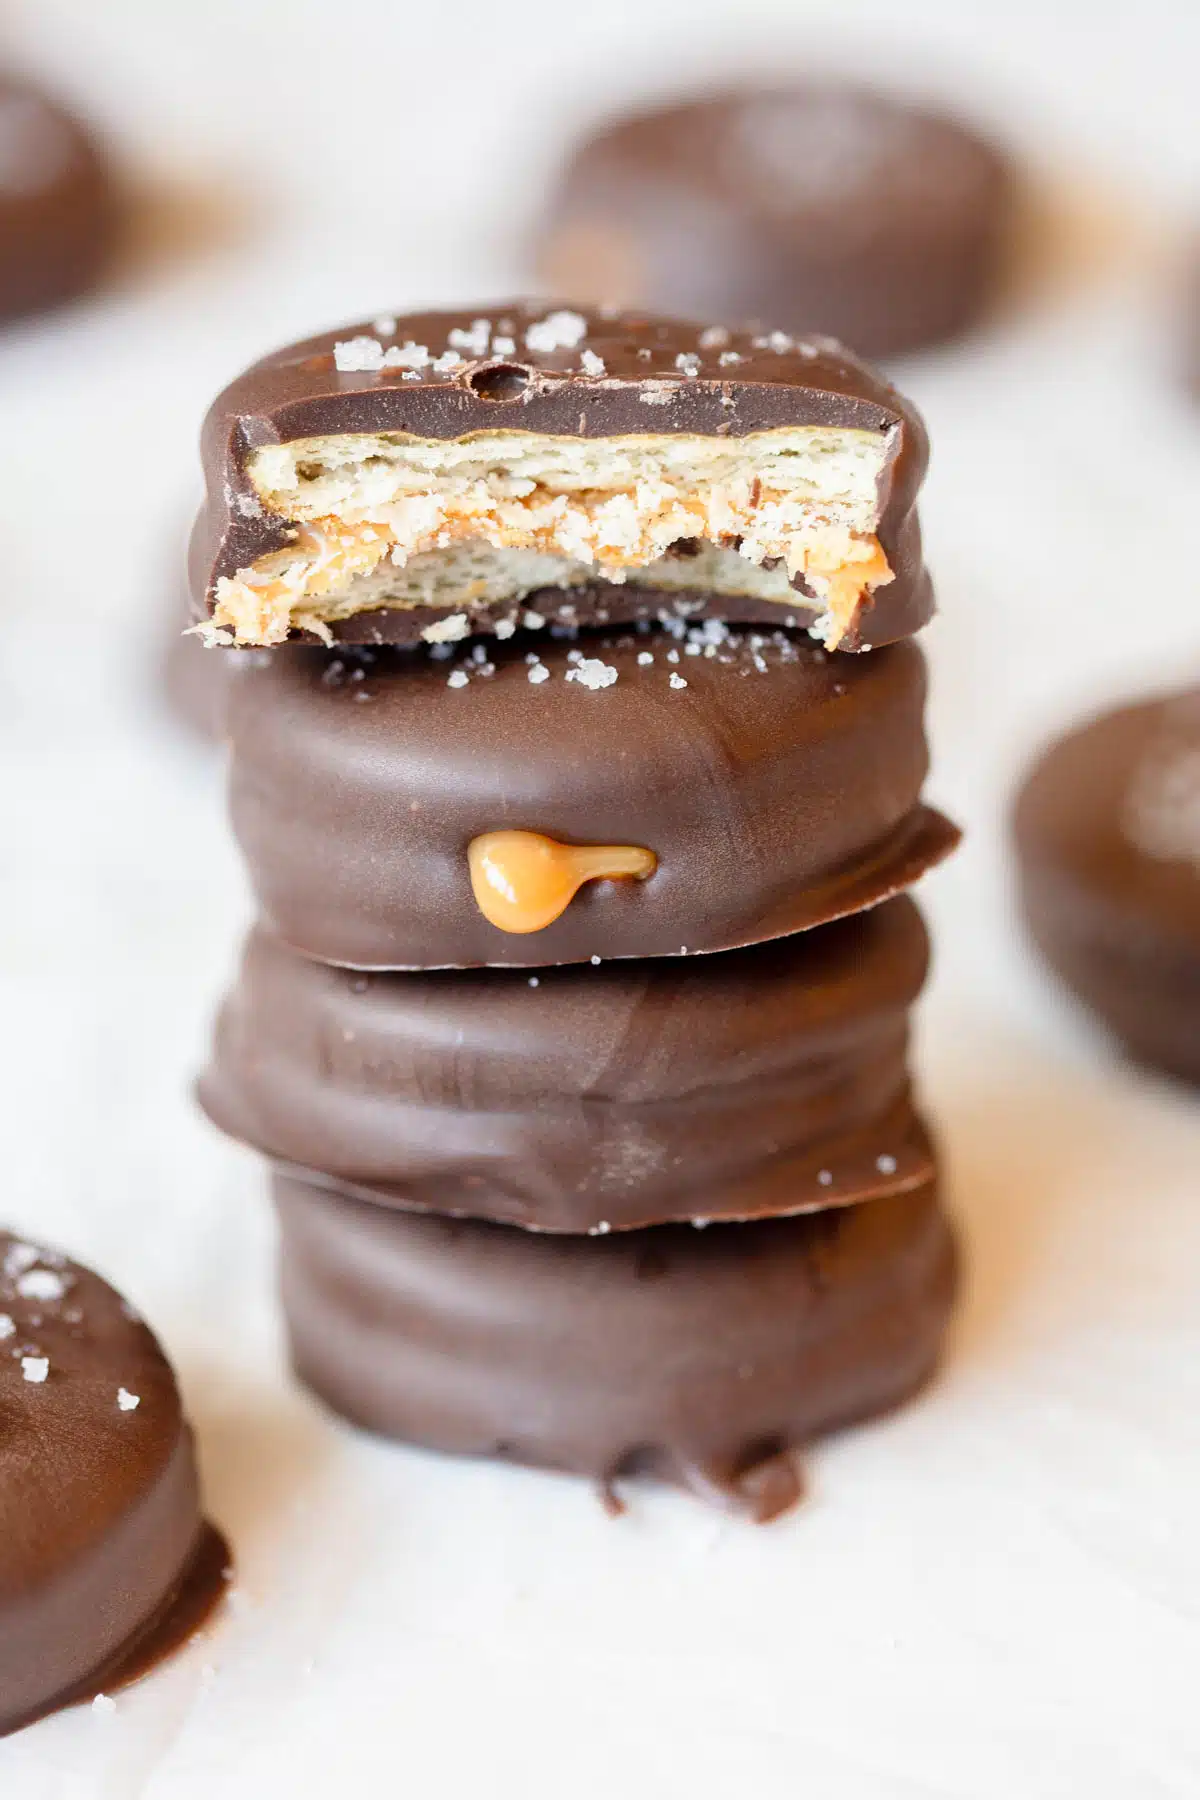 A stack of Ritz Cracker Cookies, with the top one has a bite taken out of it.